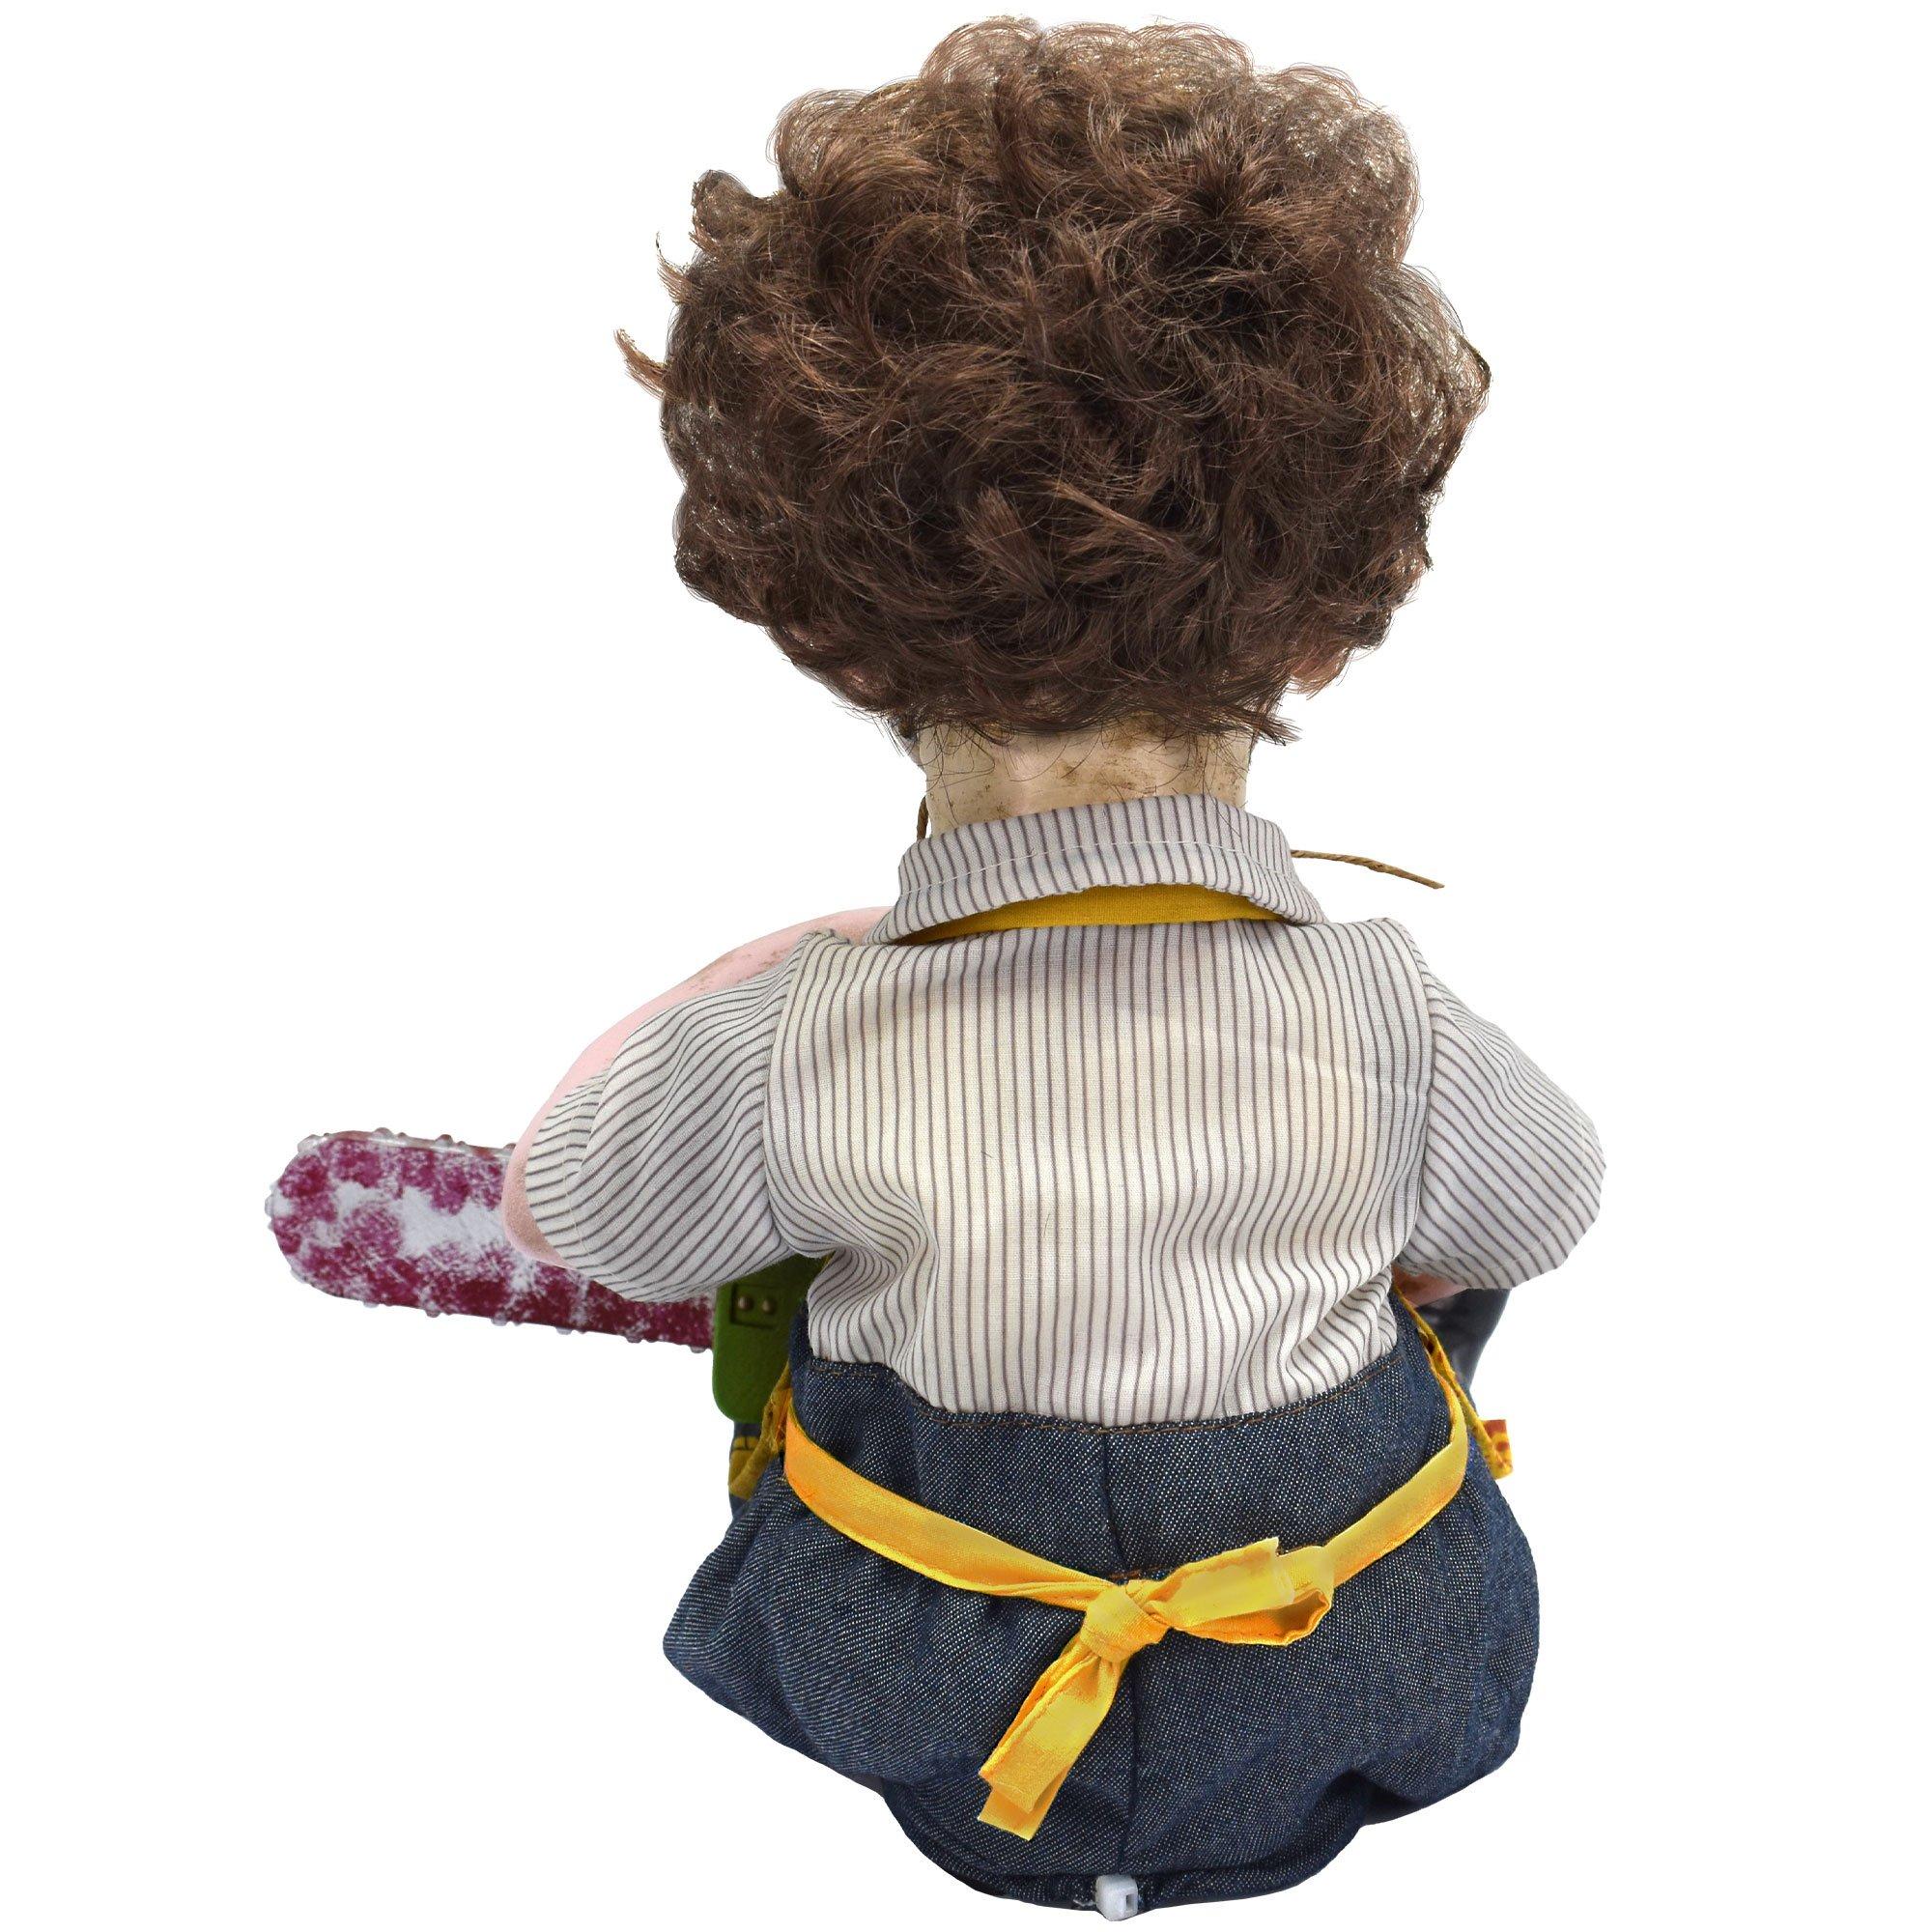 Animatronic Light-Up Sitting Leatherface® Doll Decoration, 10in - The Texas Chainsaw Massacre